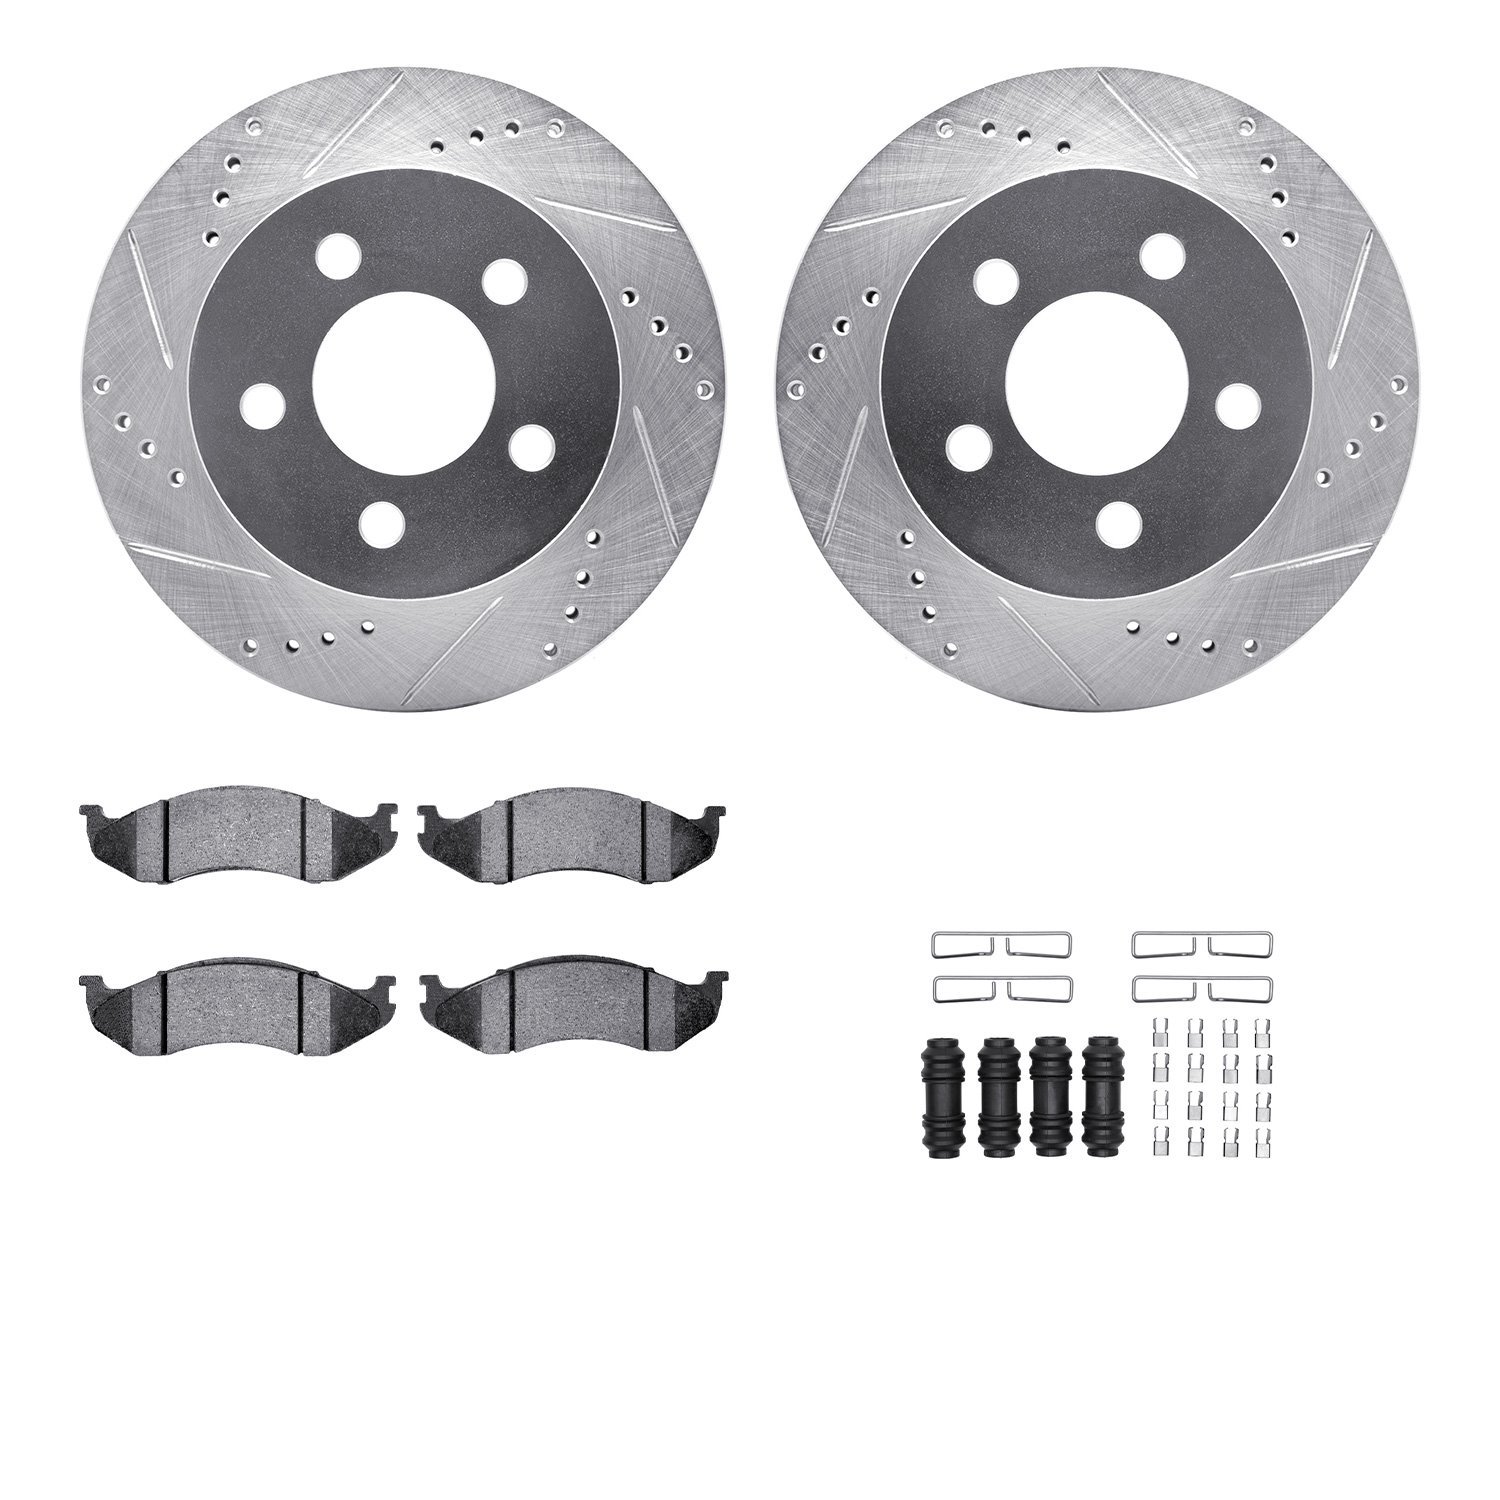 7412-42035 Drilled/Slotted Brake Rotors with Ultimate-Duty Brake Pads Kit & Hardware [Silver], 1999-2006 Mopar, Position: Front